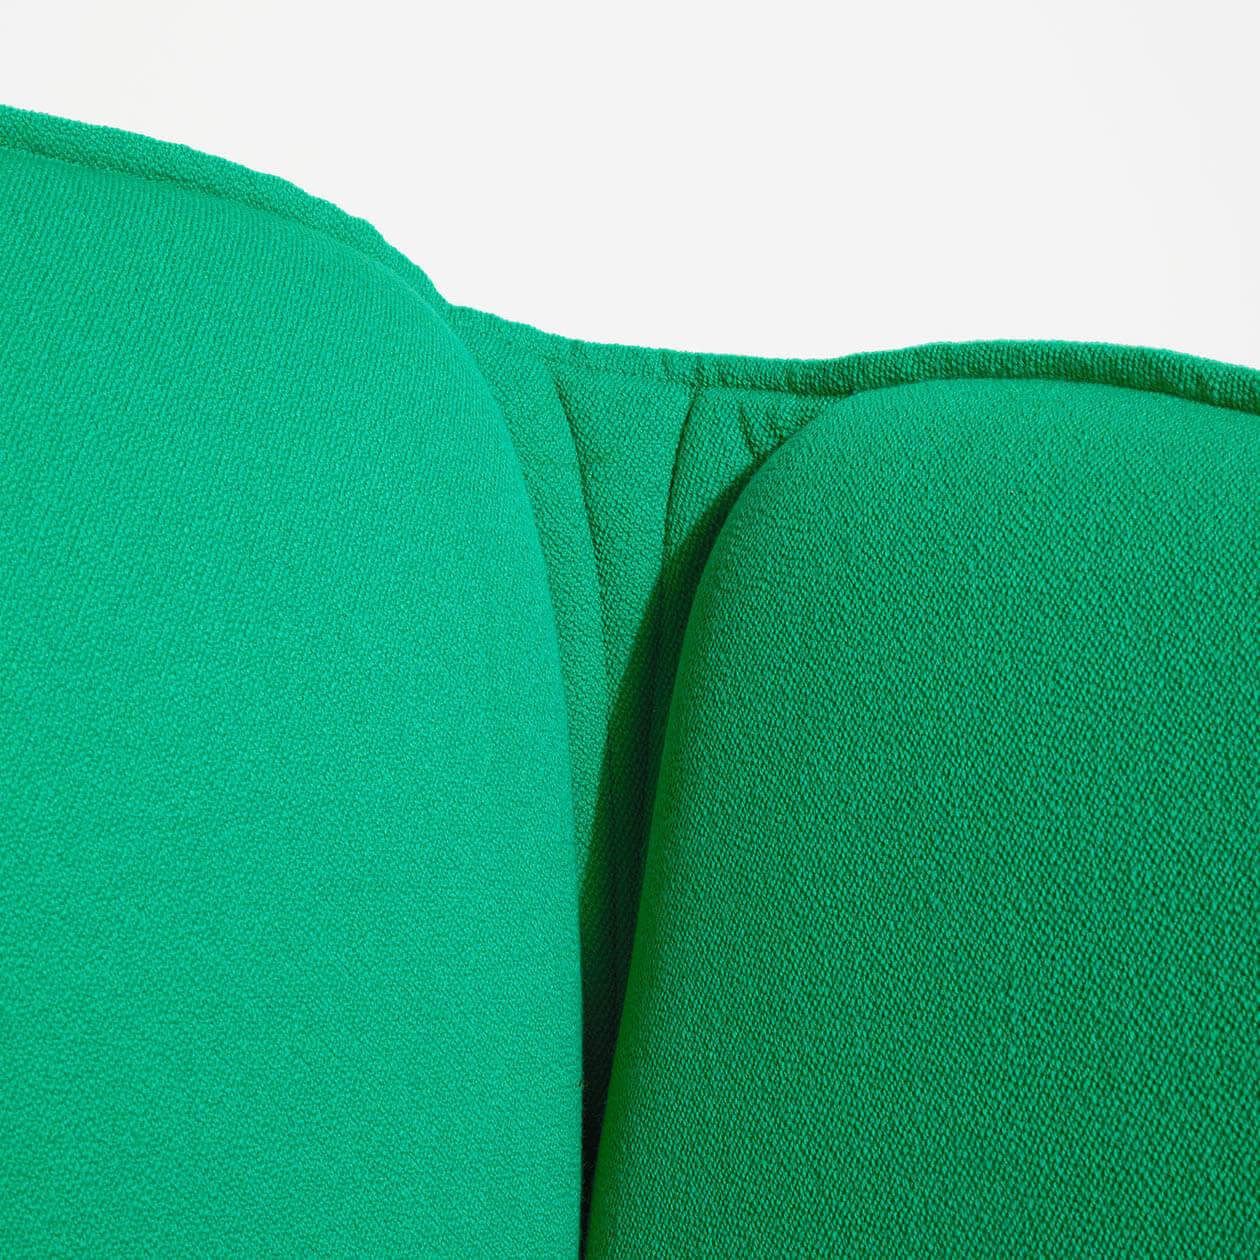 Armchair Lily - green flash - Petite Friture